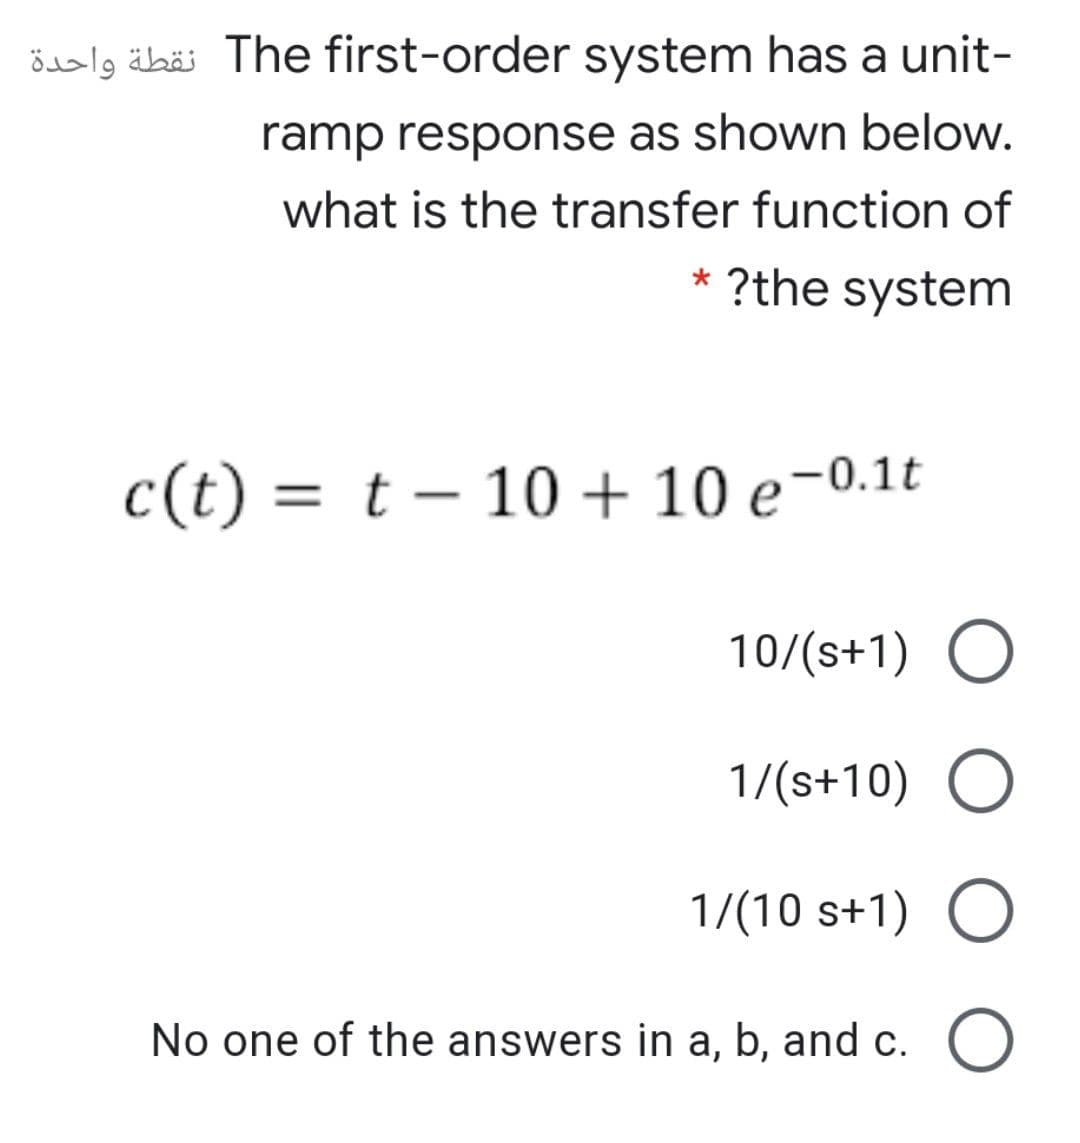 ösalg äbäi The first-order system has a unit-
ramp response as shown below.
what is the transfer function of
* ?the system
c(t) = t – 10 + 10 e-0.1t
10/(s+1) O
1/(s+10) O
1/(10 s+1)
No one of the answers in a, b, and c. O
